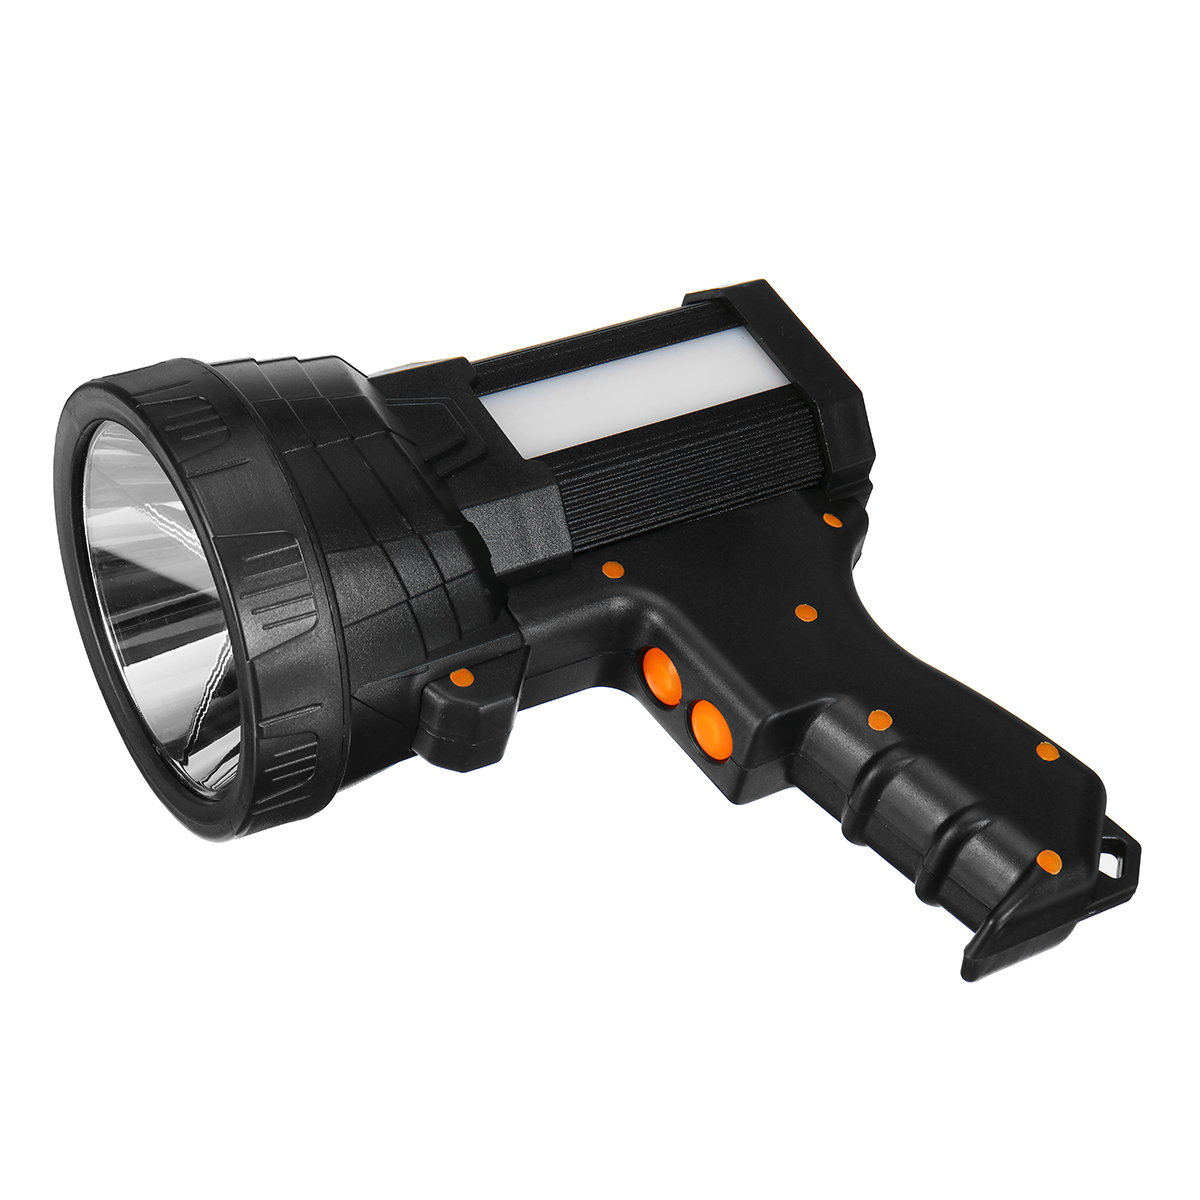 L2-Strong-LED-Spotlight-with-Tripod-USB-Rechargeable-Powerful-Searchlight-Portable-Handle-Flashlight-1756922-5